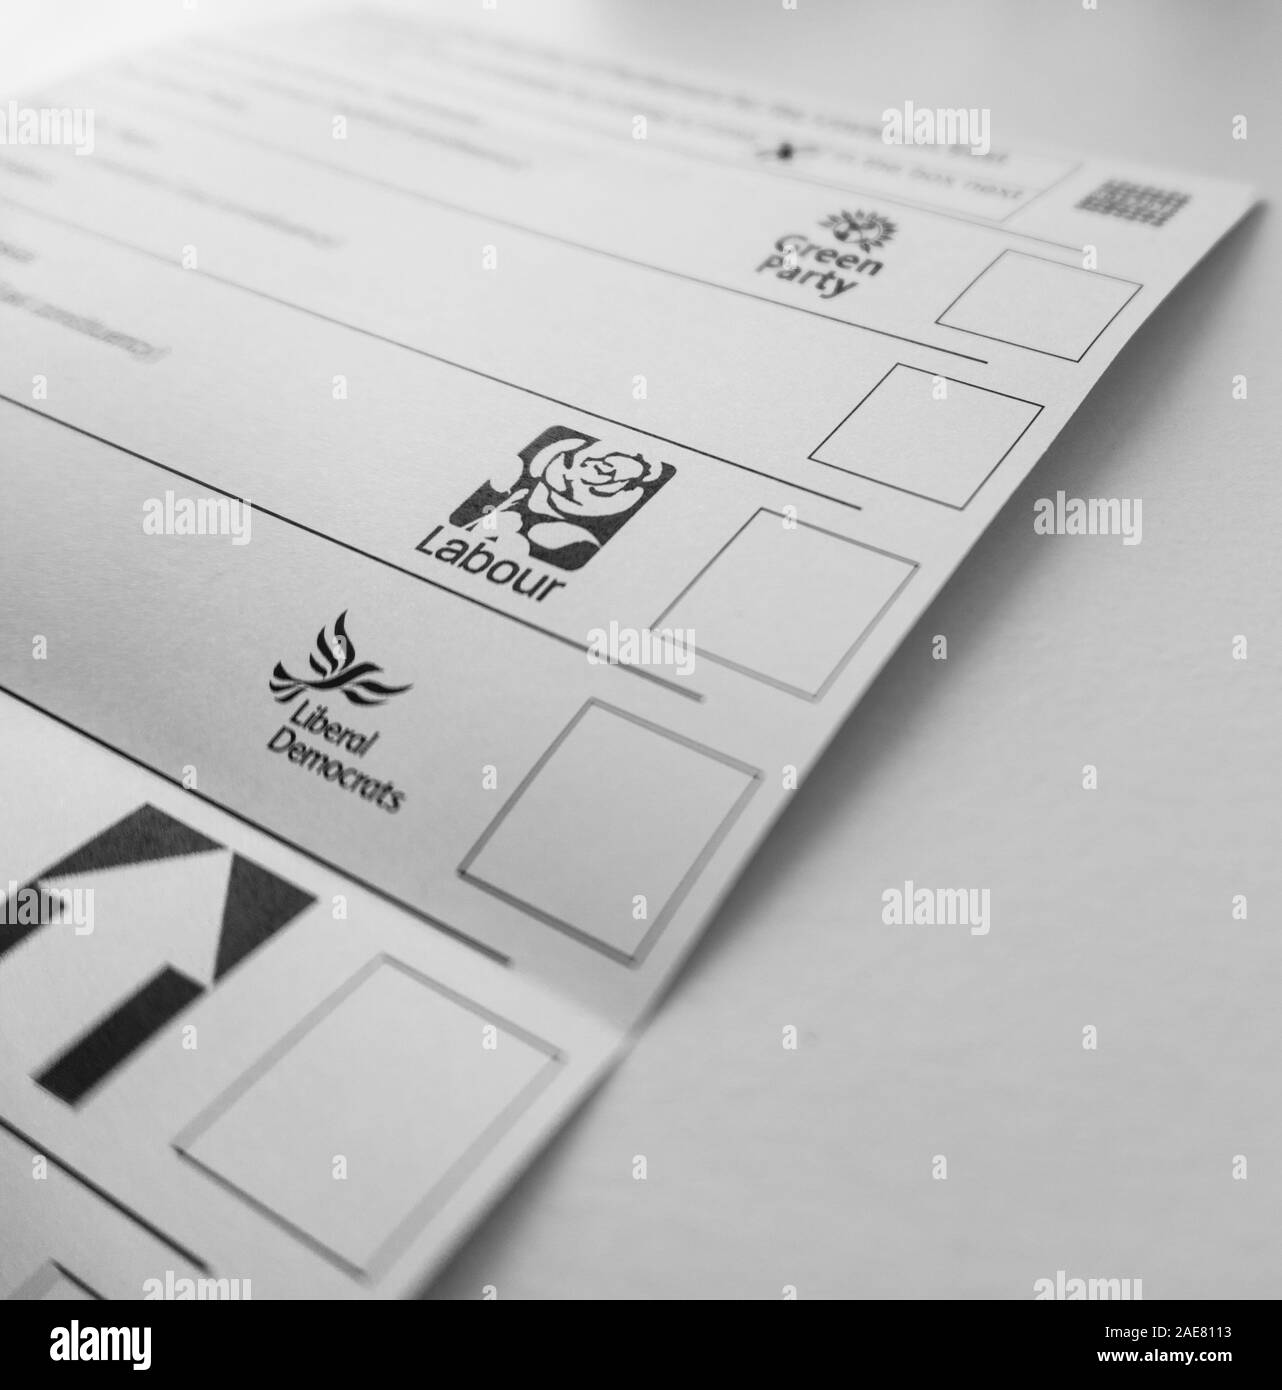 London / United Kingdom - December 7th 2019: General election ballot paper with green party, labour, libdem, young peoples party logos Stock Photo